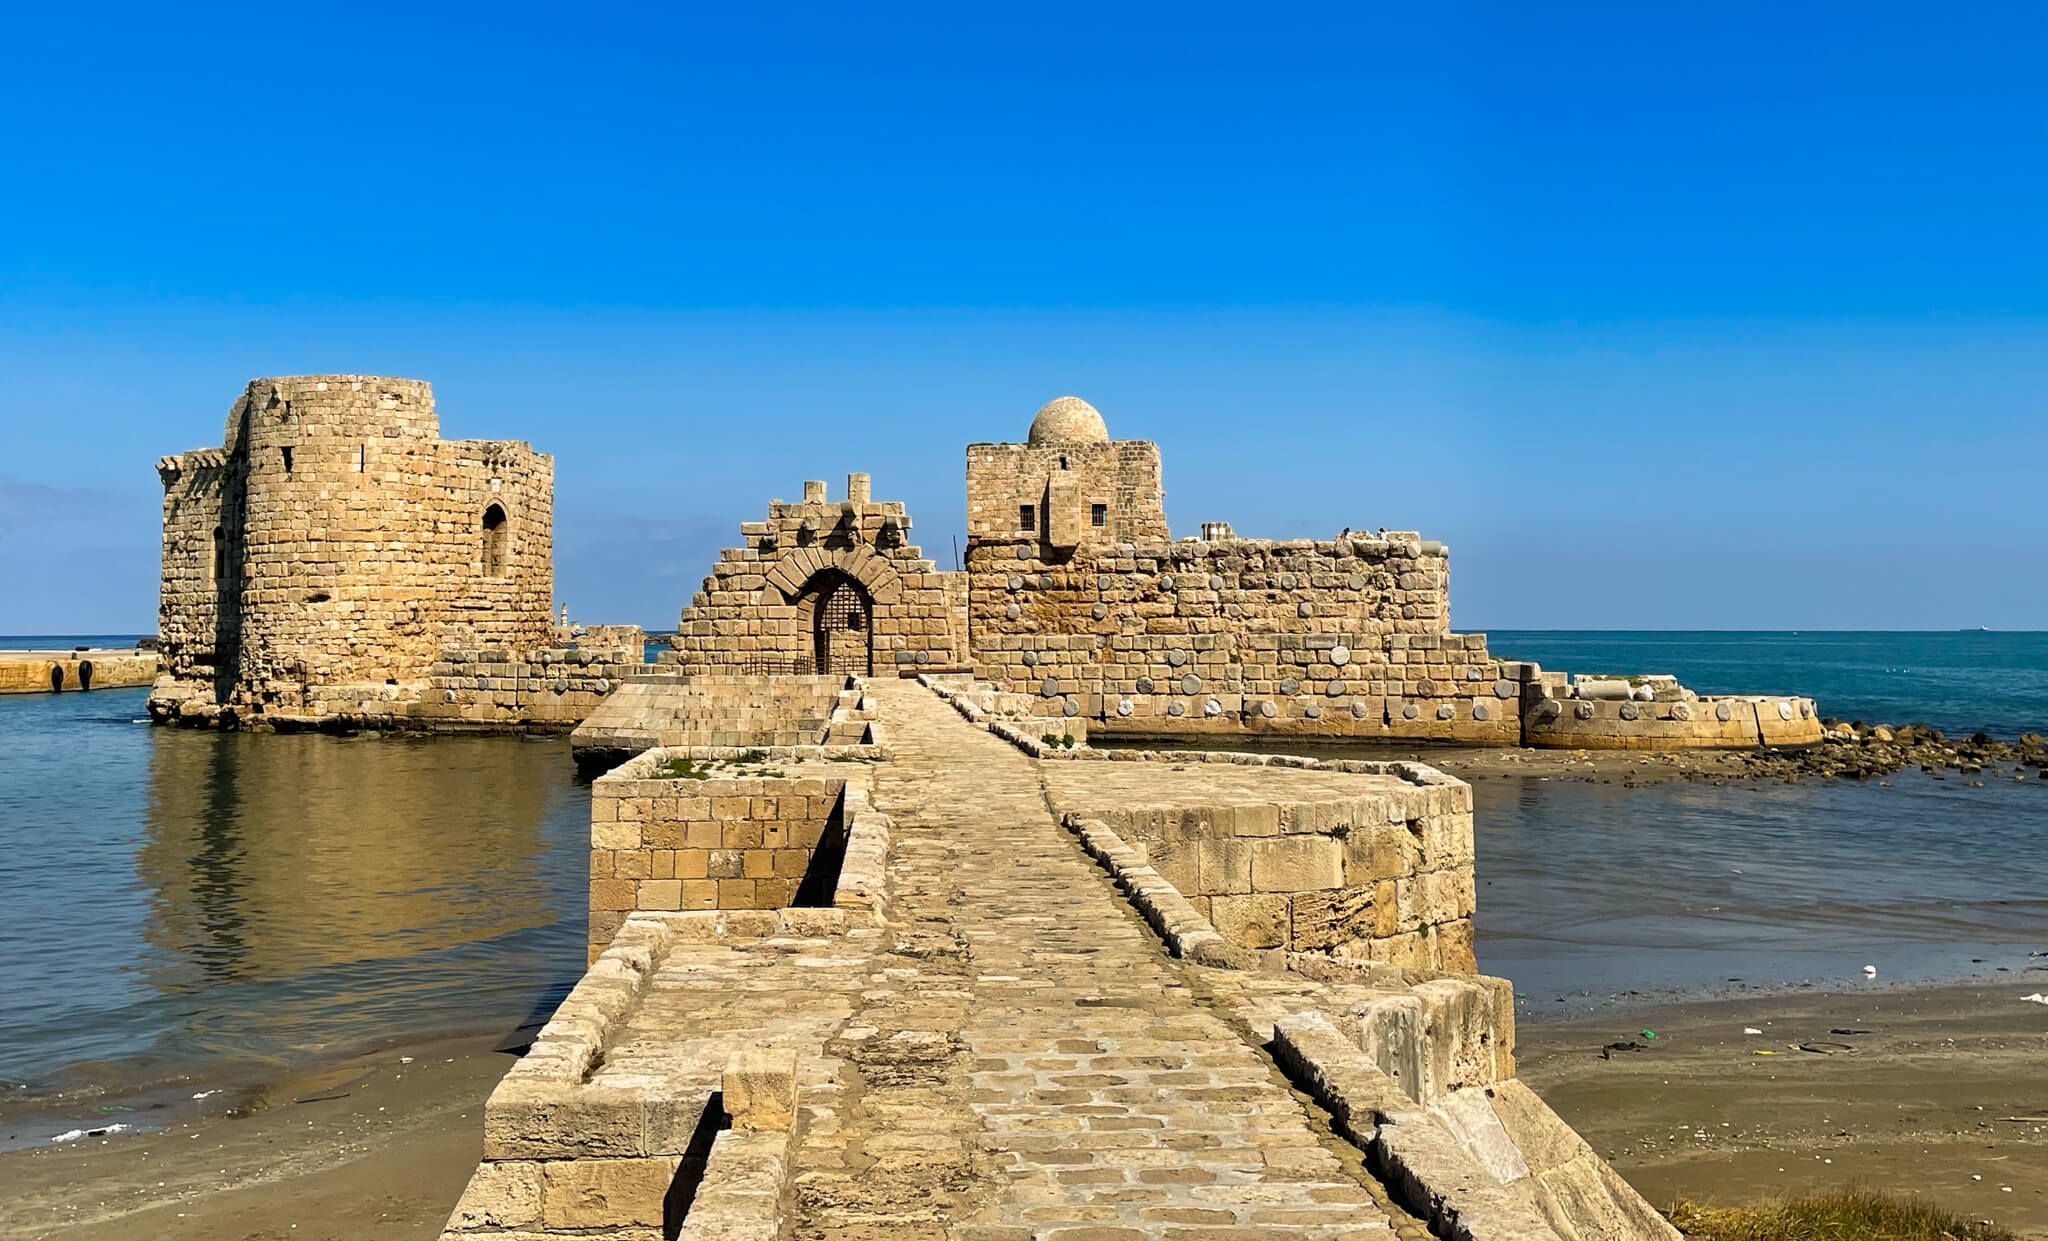 A stone castle stands in the sea with a stone walkway leading to it.